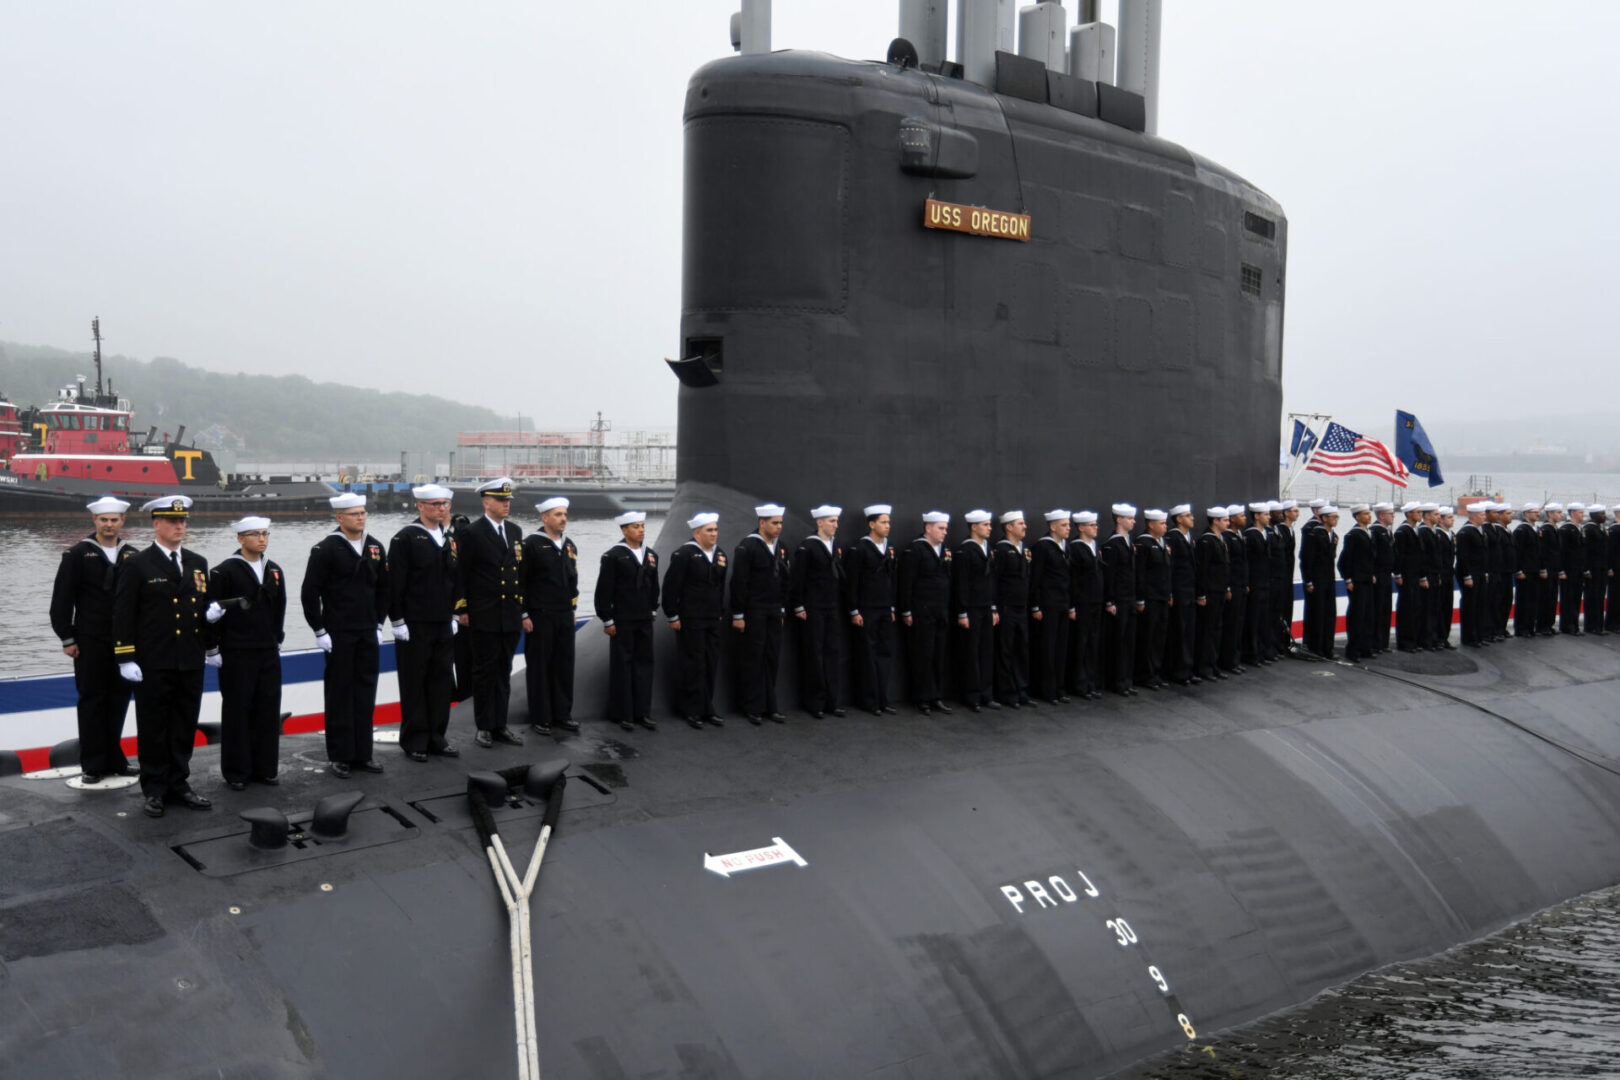 220528-N-GR655-0202 GROTON, Connecticut (May 28, 2022) – Crewmembers attached to the Virginia-class fast attack submarine USS Oregon (SSN 793) man the ship during a commissioning ceremony in Groton, Conn., May 28, 2022. SSN 793, the third U.S Navy ship launched with the name Oregon and first in more than a century, is a flexible, multi-mission platform designed to carry out the seven core competencies of the submarine force: anti-submarine warfare; anti-surface warfare; delivery of special operations forces; strike warfare; irregular warfare; intelligence, surveillance and reconnaissance; and mine warfare. (U.S. Navy photo by Chief Petty Officer Joshua Karsten)